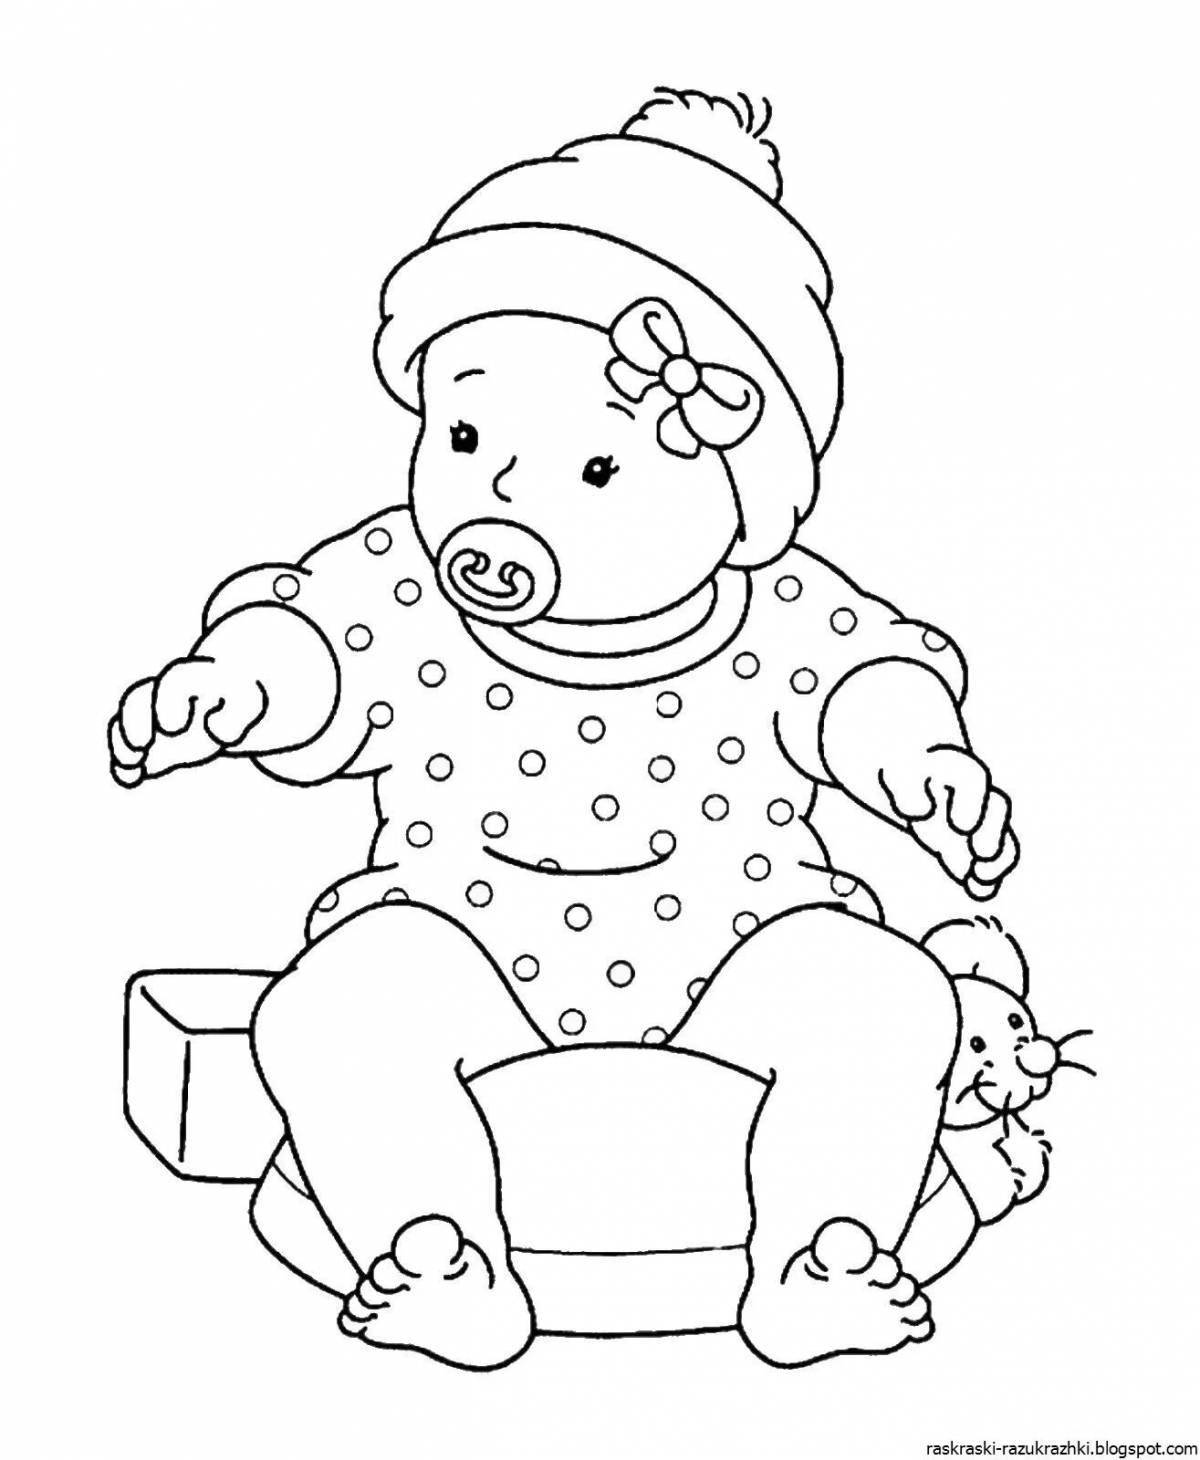 Sweet coloring dolls for babies